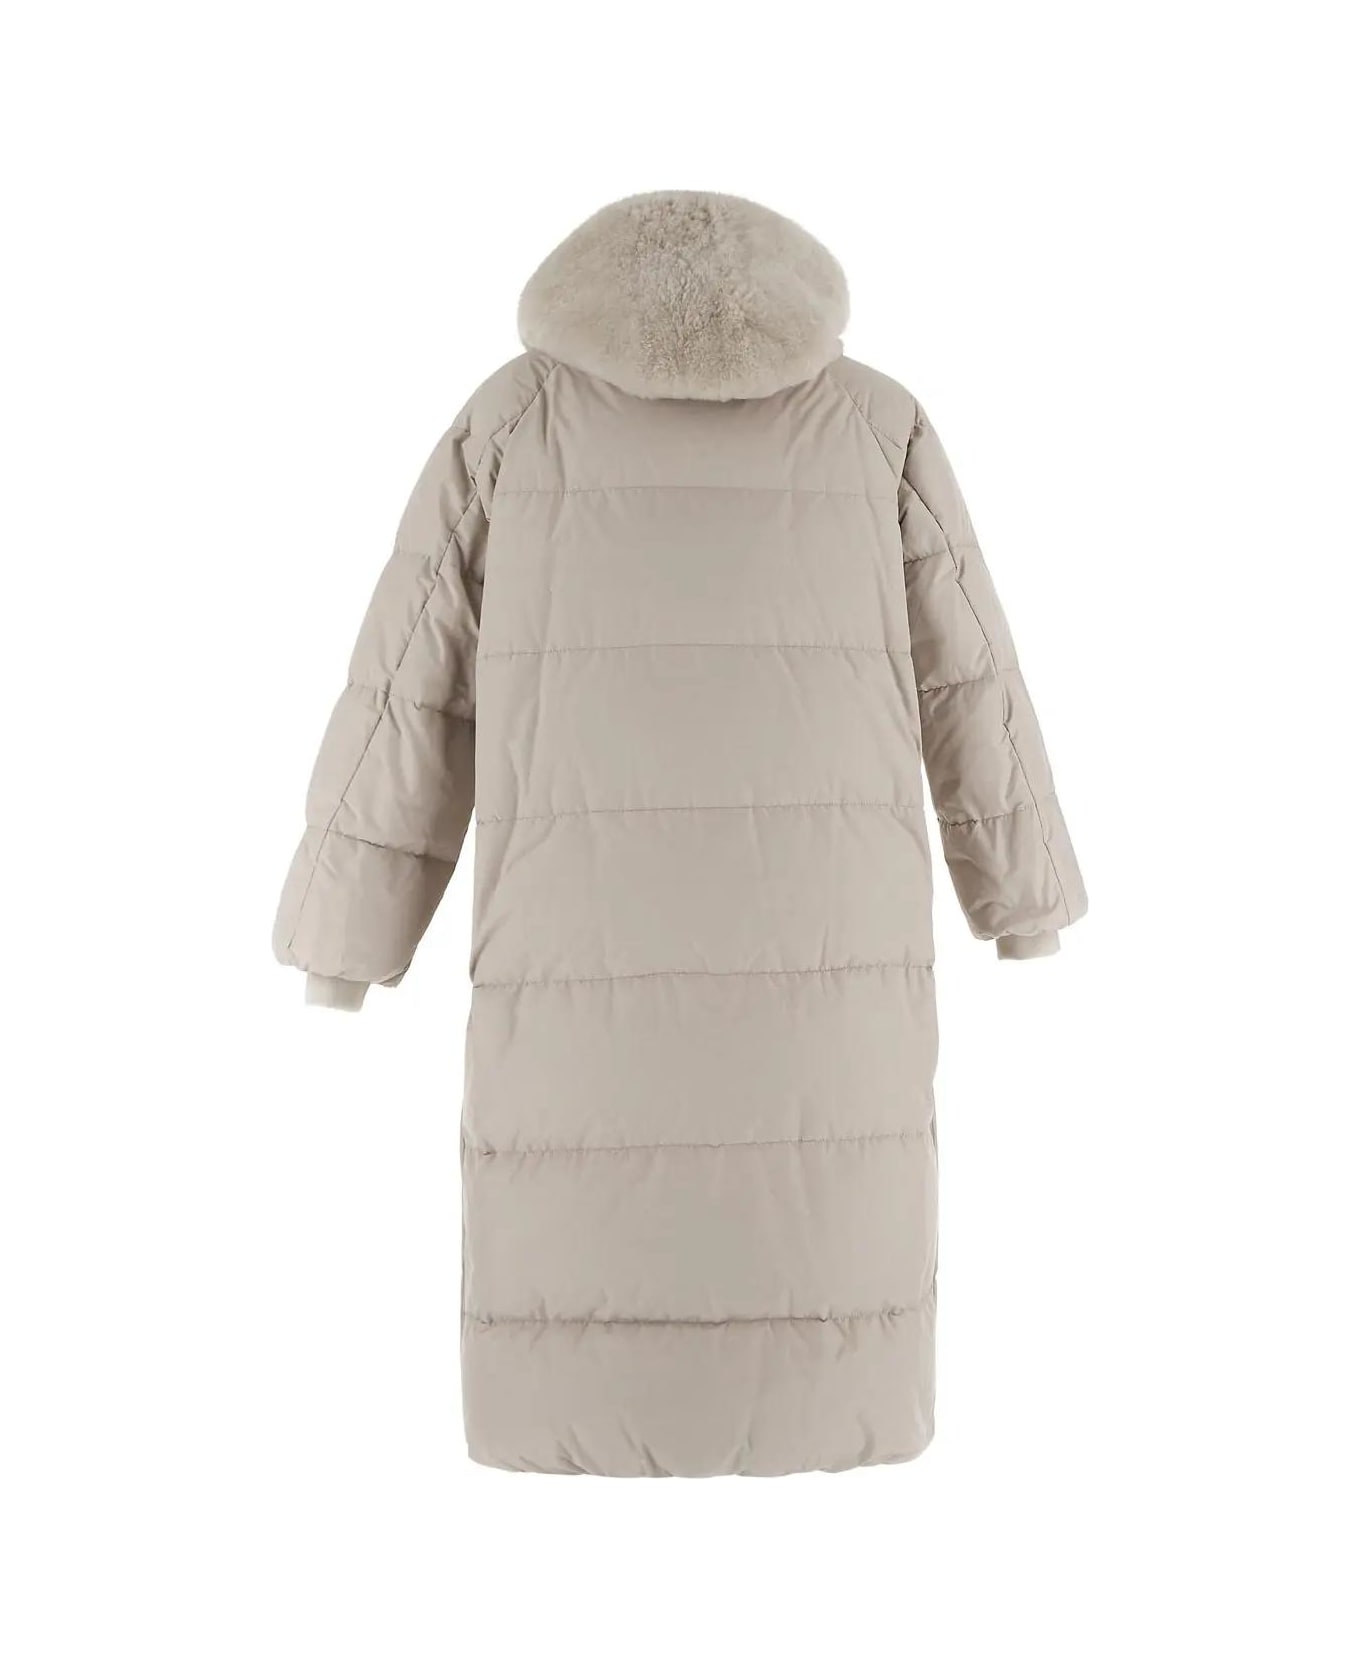 Brunello Cucinelli Long Down Jacket With Detachable Hood - Grey Plaster